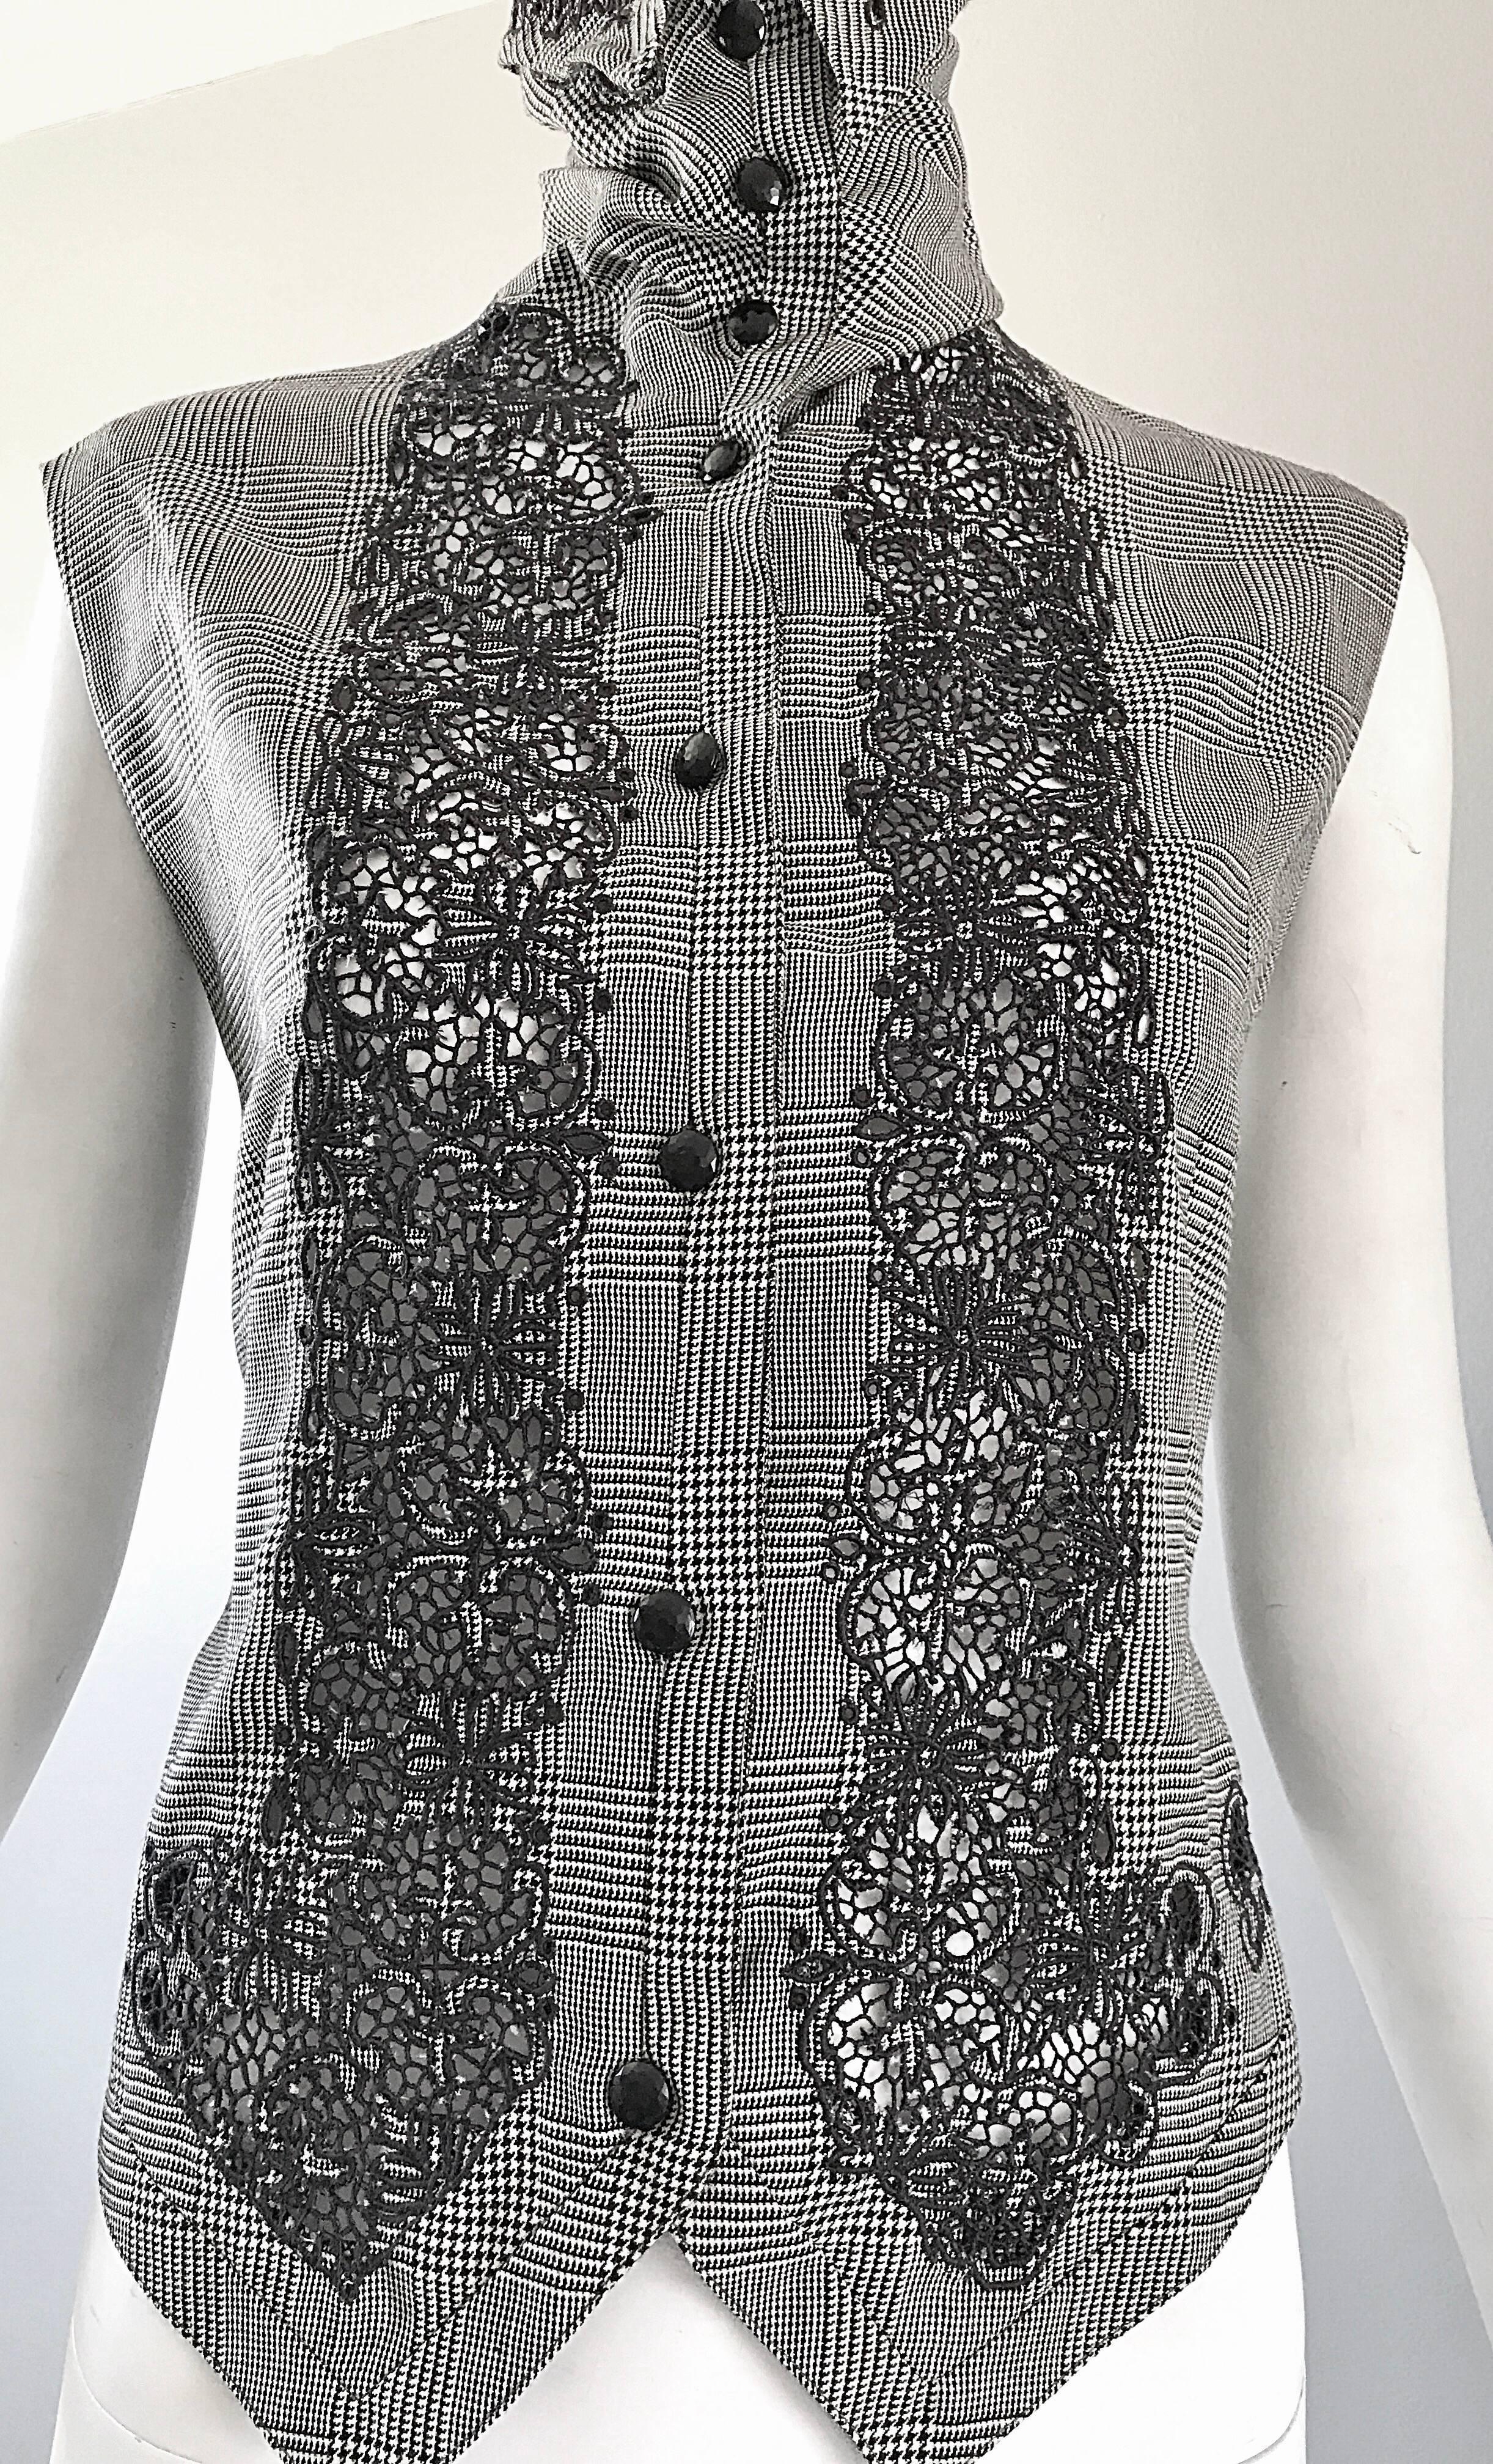 Rare Early Gianni Versace Black and White Houndstooth Plaid Embroidered Vest Top In Excellent Condition For Sale In San Diego, CA